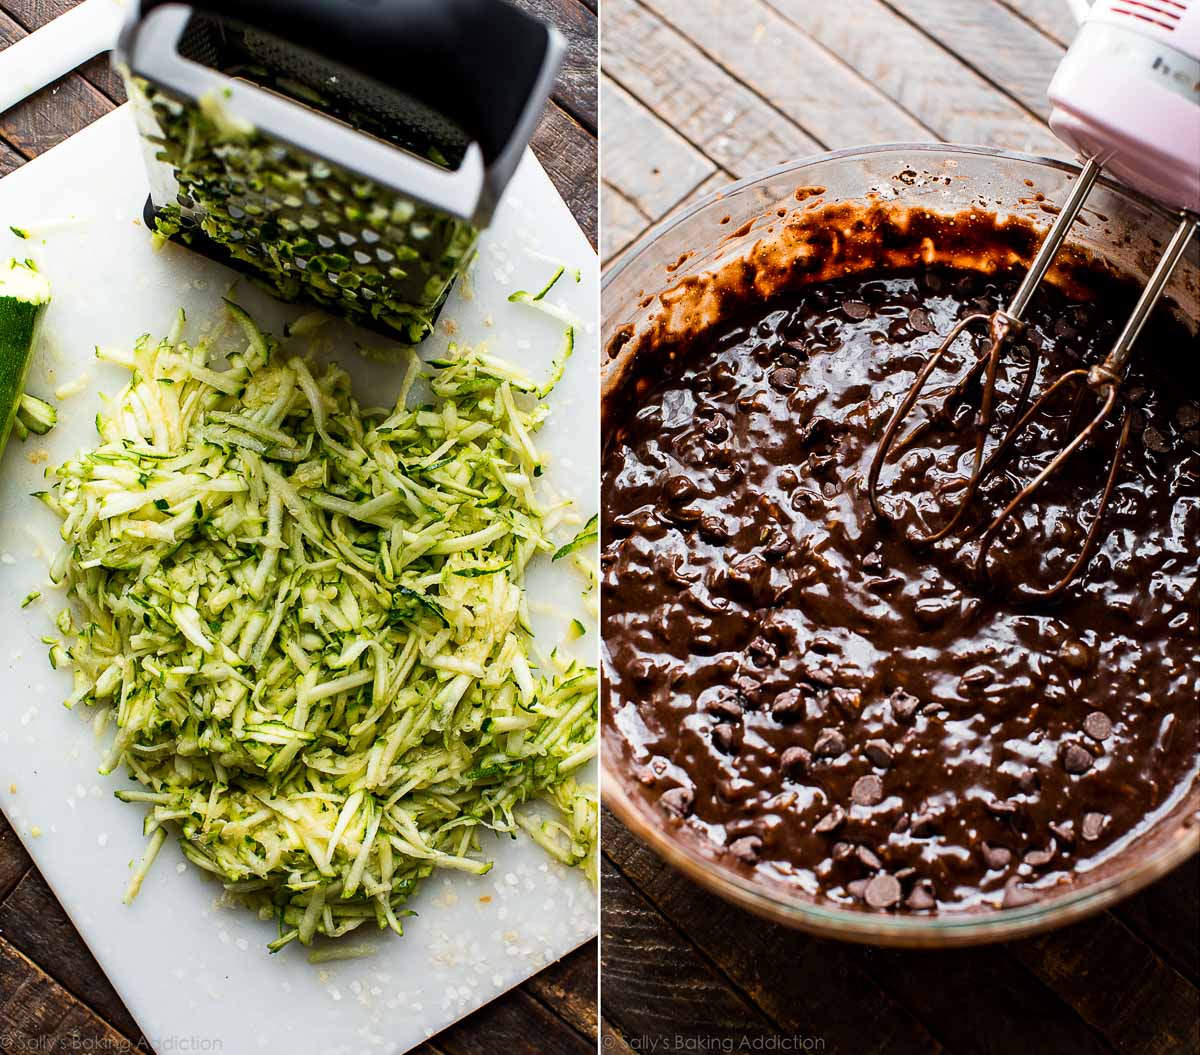 2 images of shredded zucchini on a white cutting board and chocolate cake batter in a glass bowl with a hand mixer